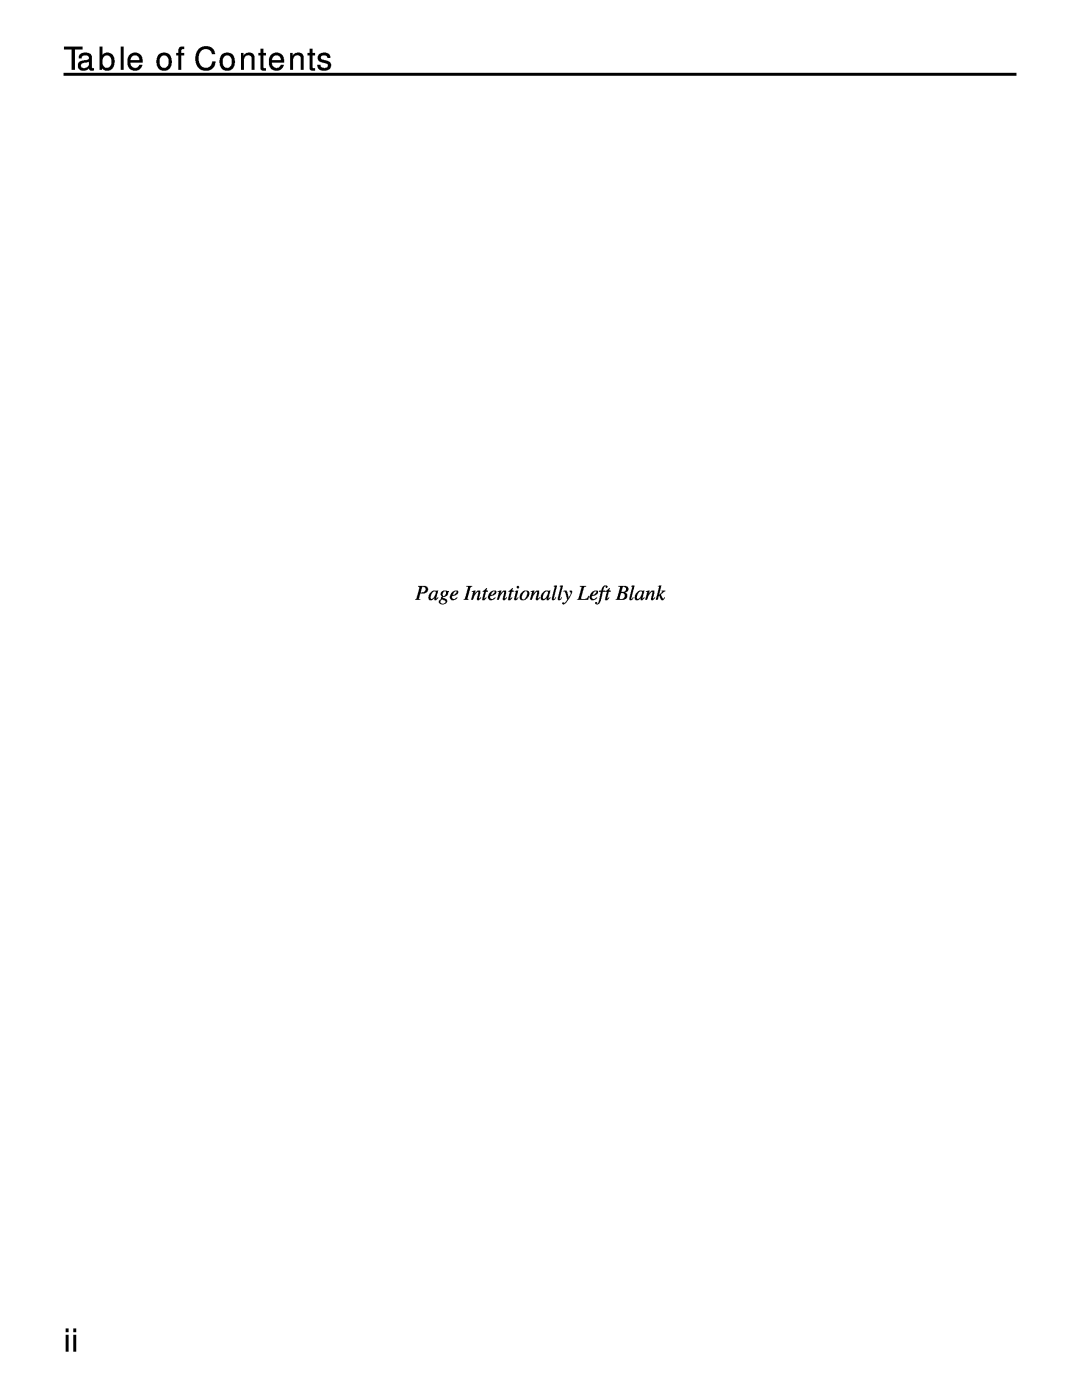 Manitowoc Ice Q 1800 manual Table of Contents, Page Intentionally Left Blank 